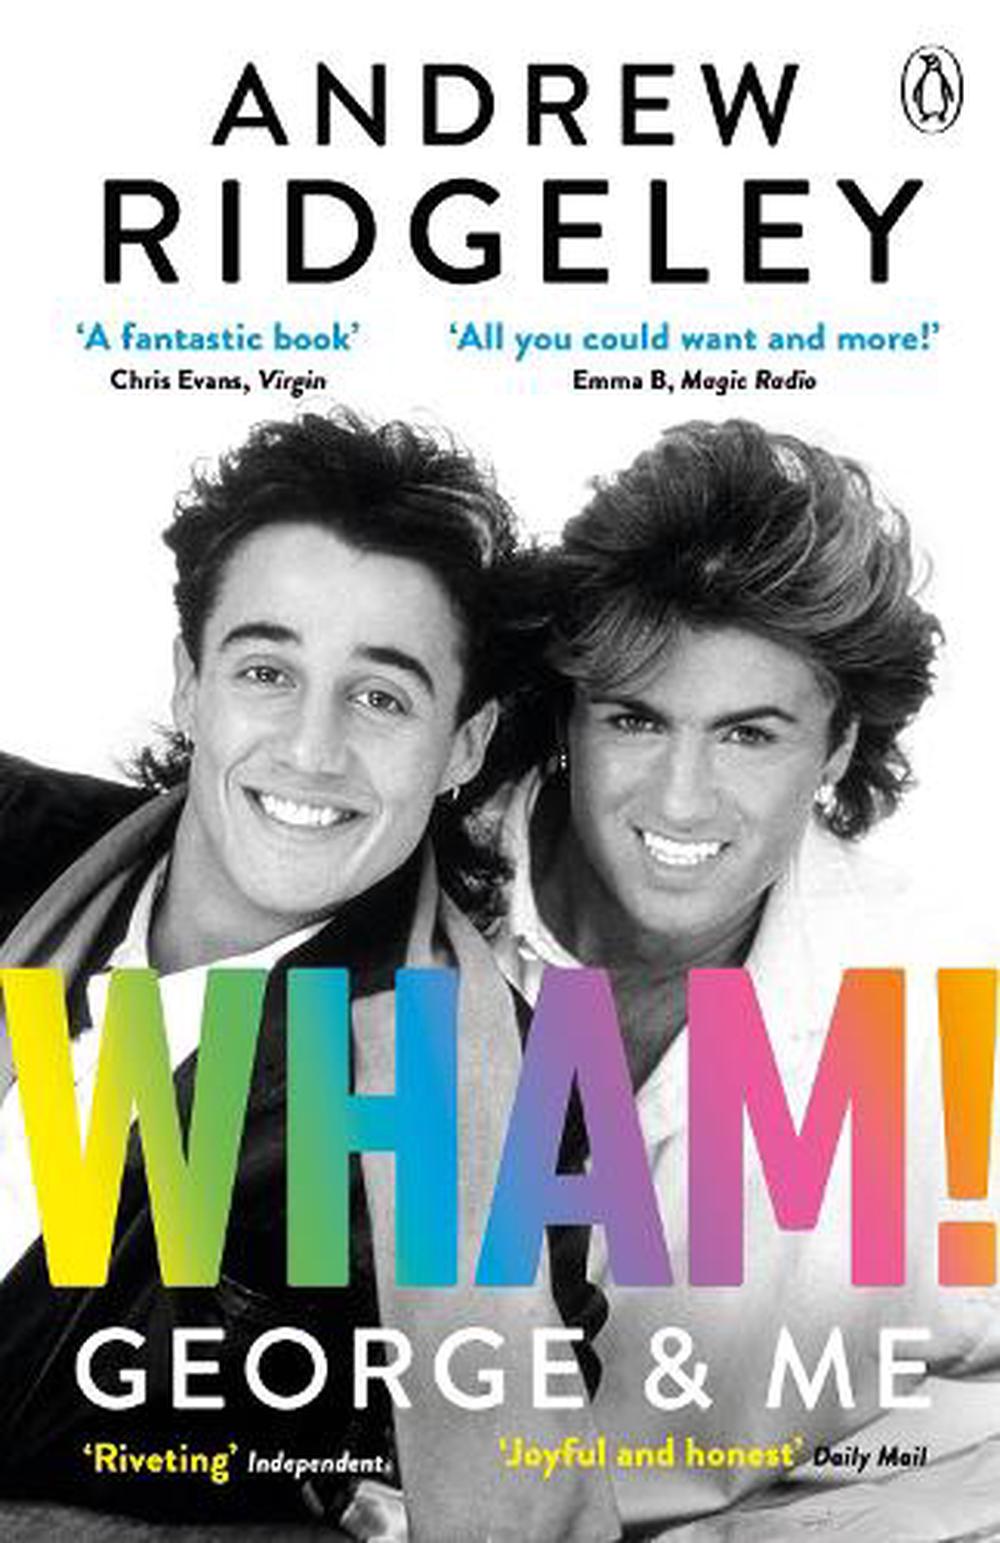 Wham! George & Me: The Sunday Times Bestseller by Andrew Ridgeley ...